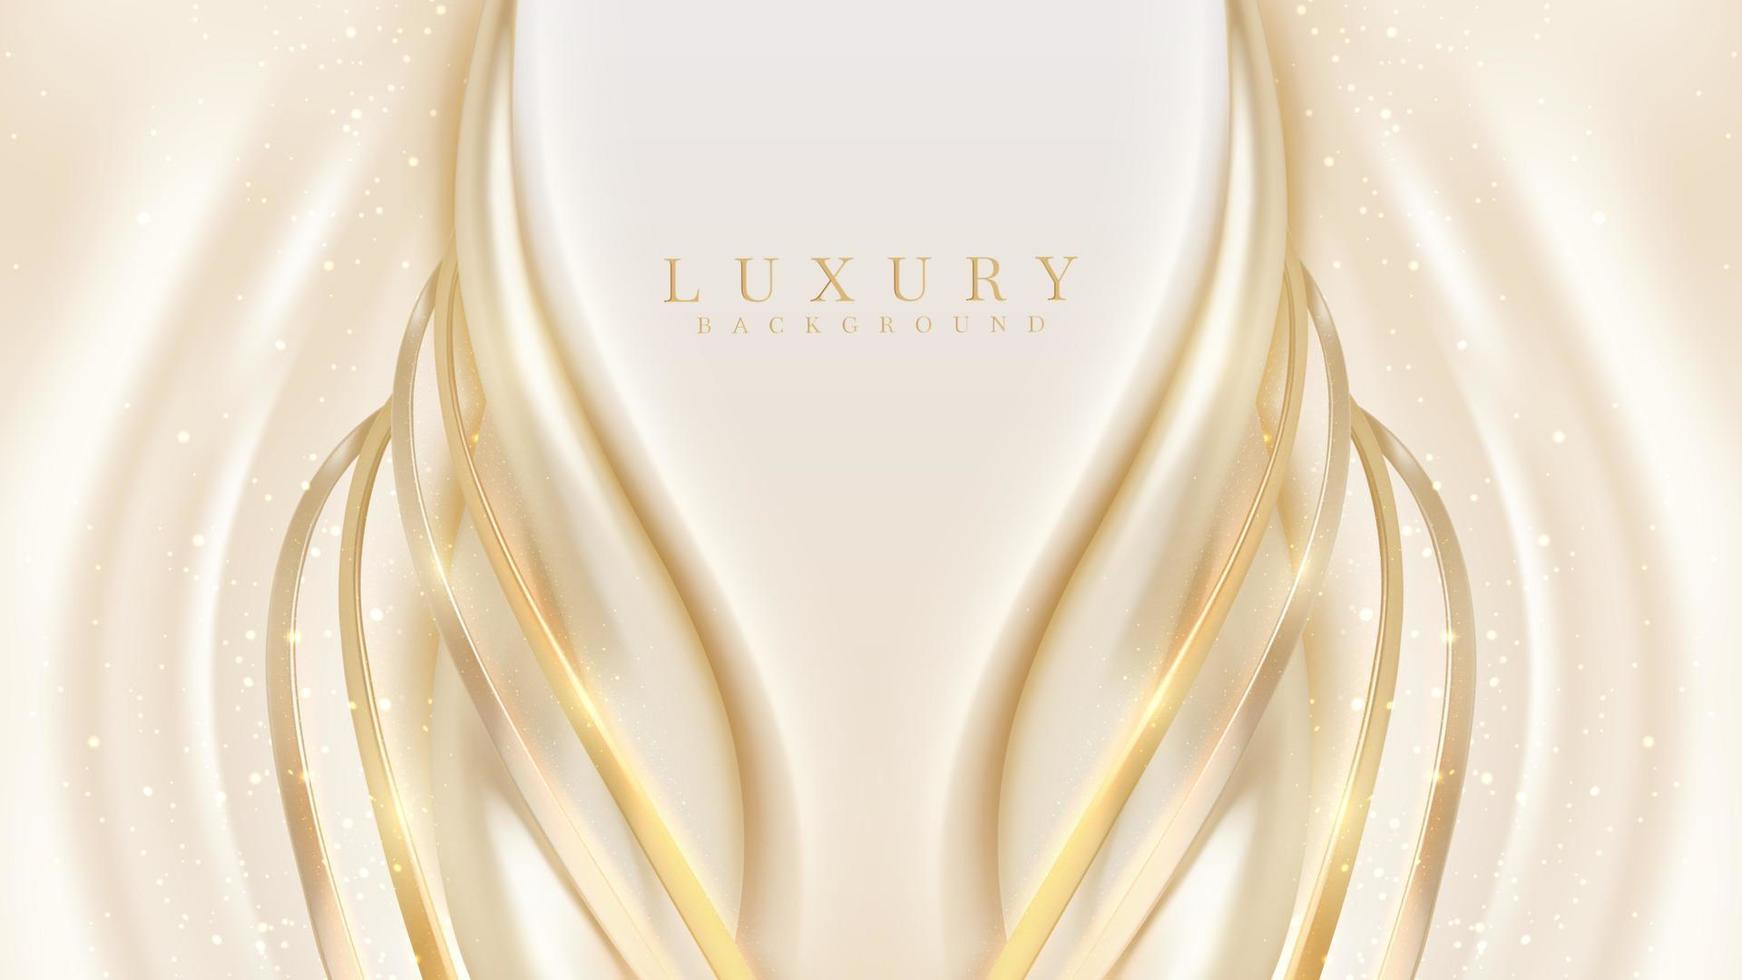 Luxury background with golden curve line element and glitter light effect decoration. vector